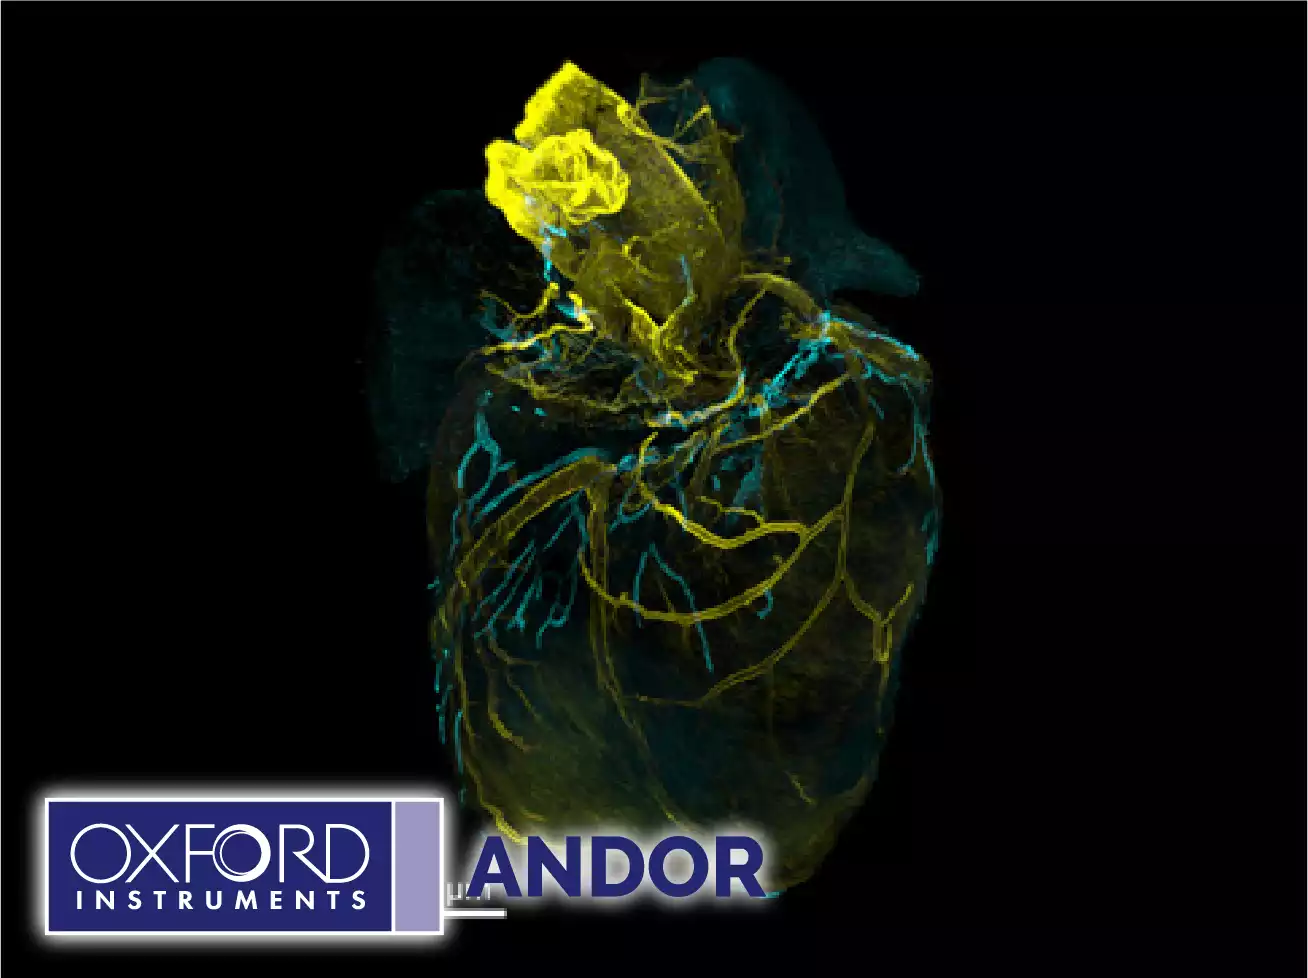 Andor High-Speed Confocal with 3D Super-Resolution